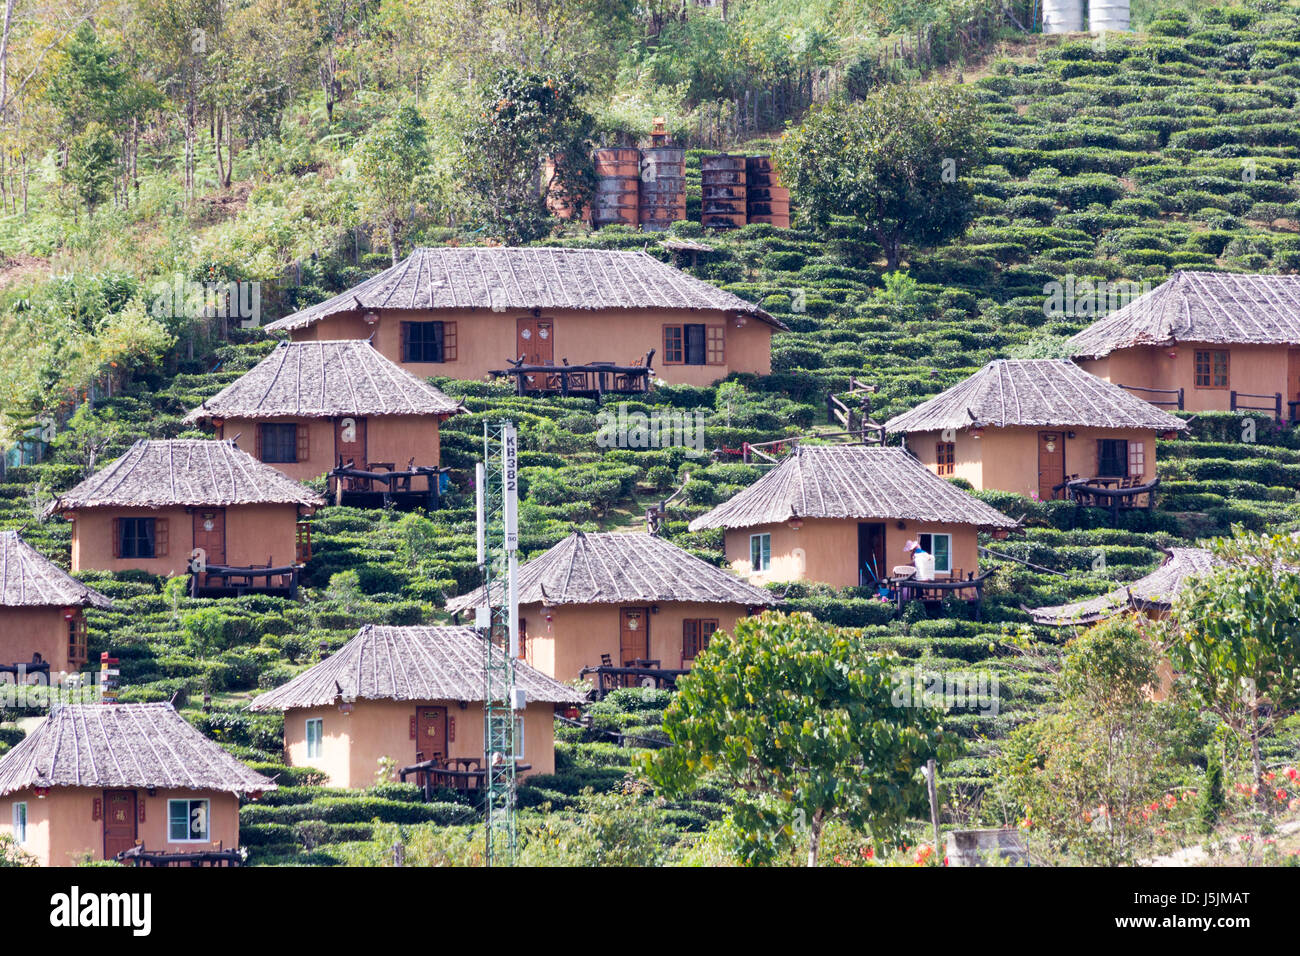 Houses and tea plantation on a hillside in the Kuomintang Chinese village of Mae Aw or Baan Rak Thai, Mae Hong Son, Thailand Stock Photo